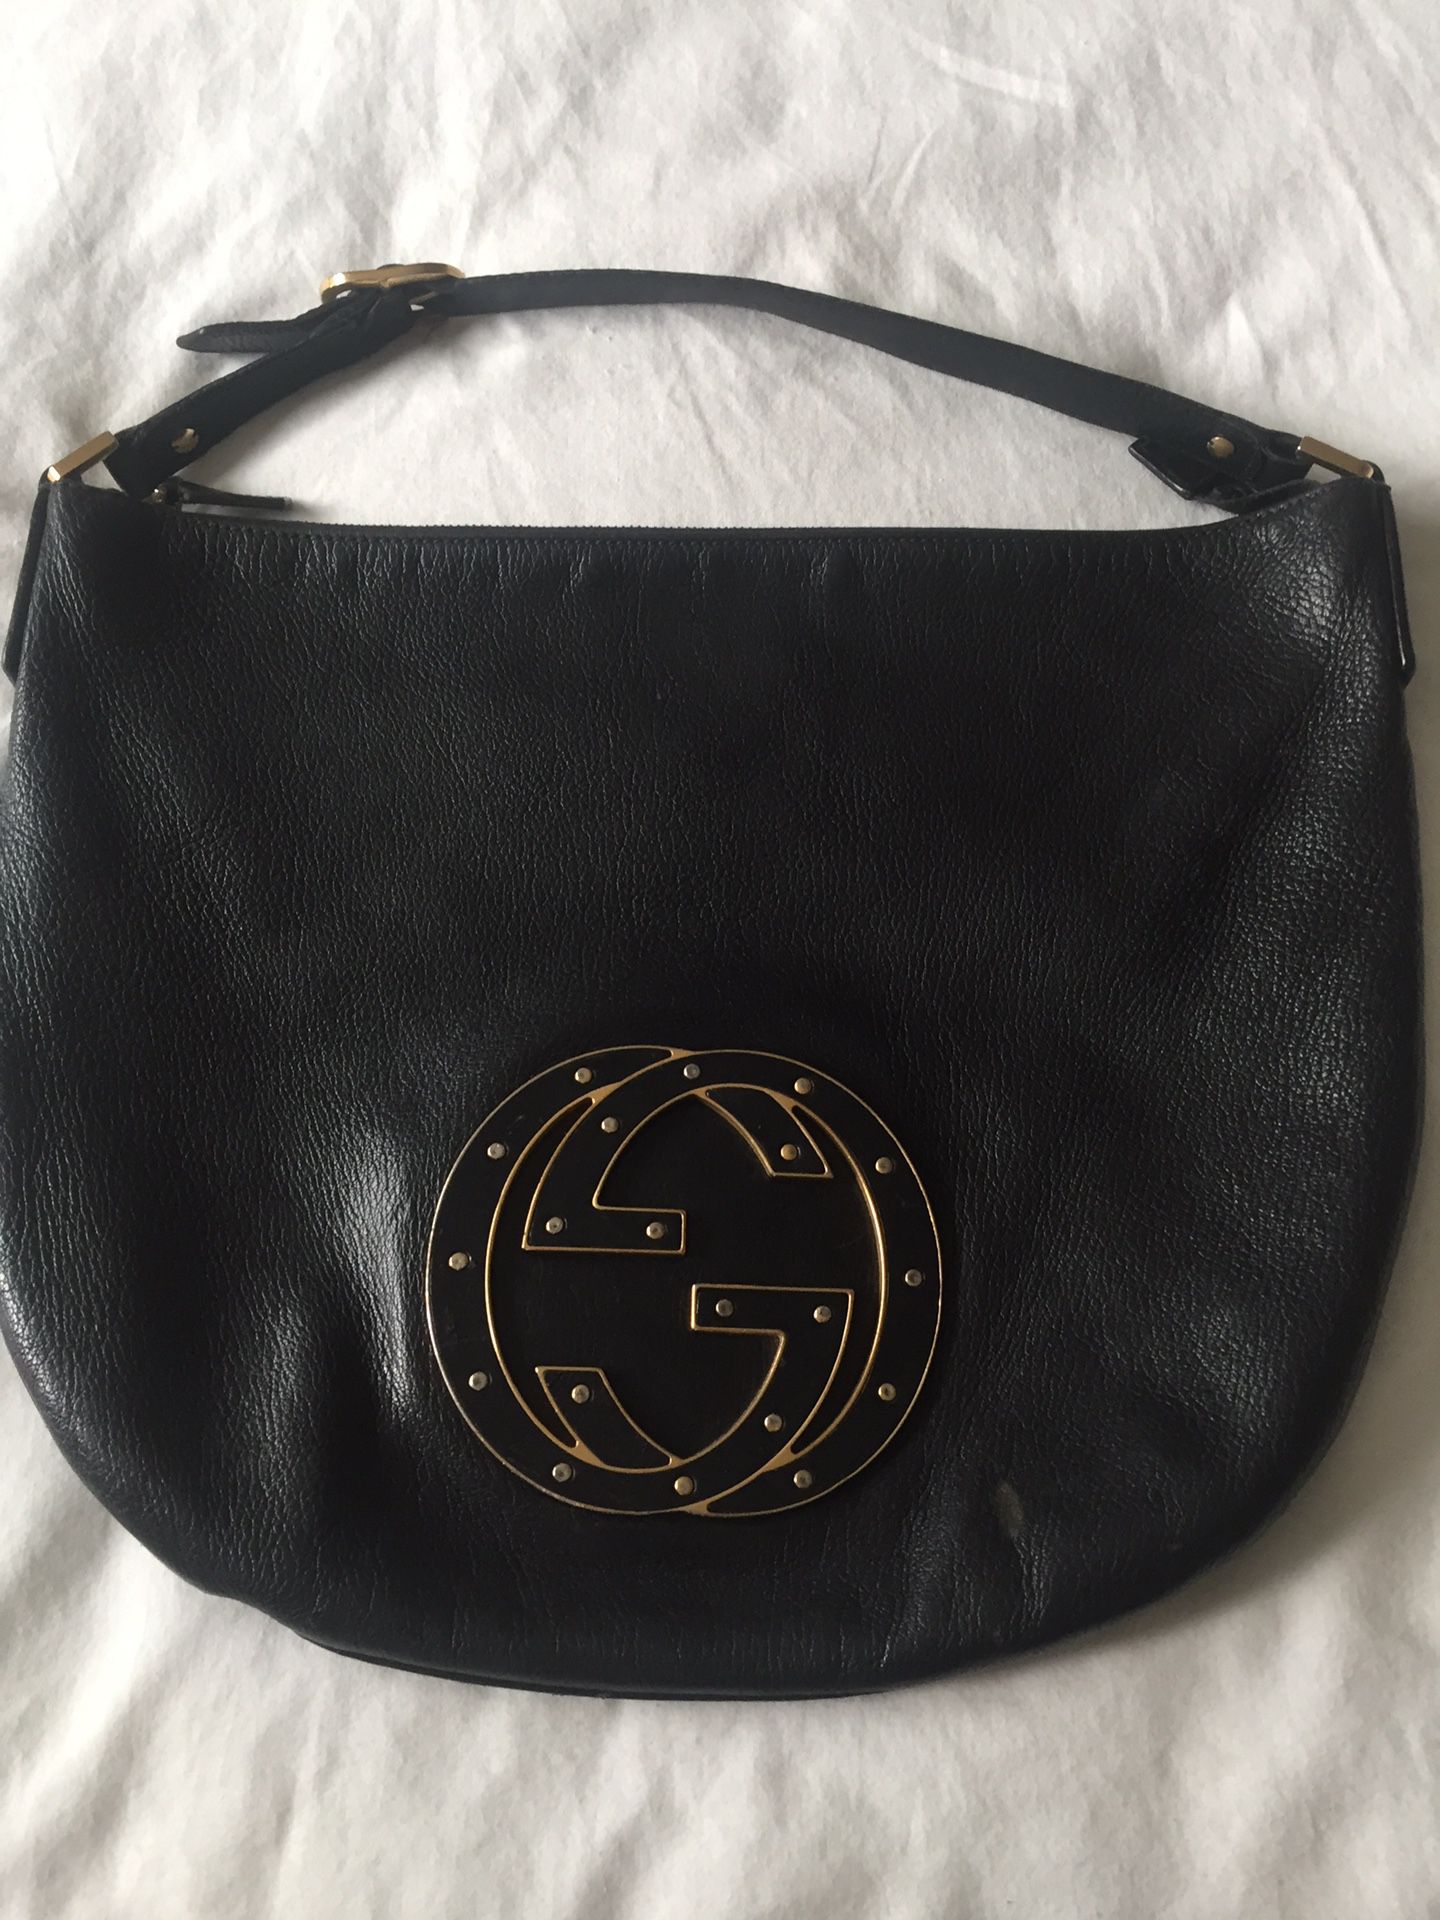 GUCCI Soho Limited edition Hobo leather bag